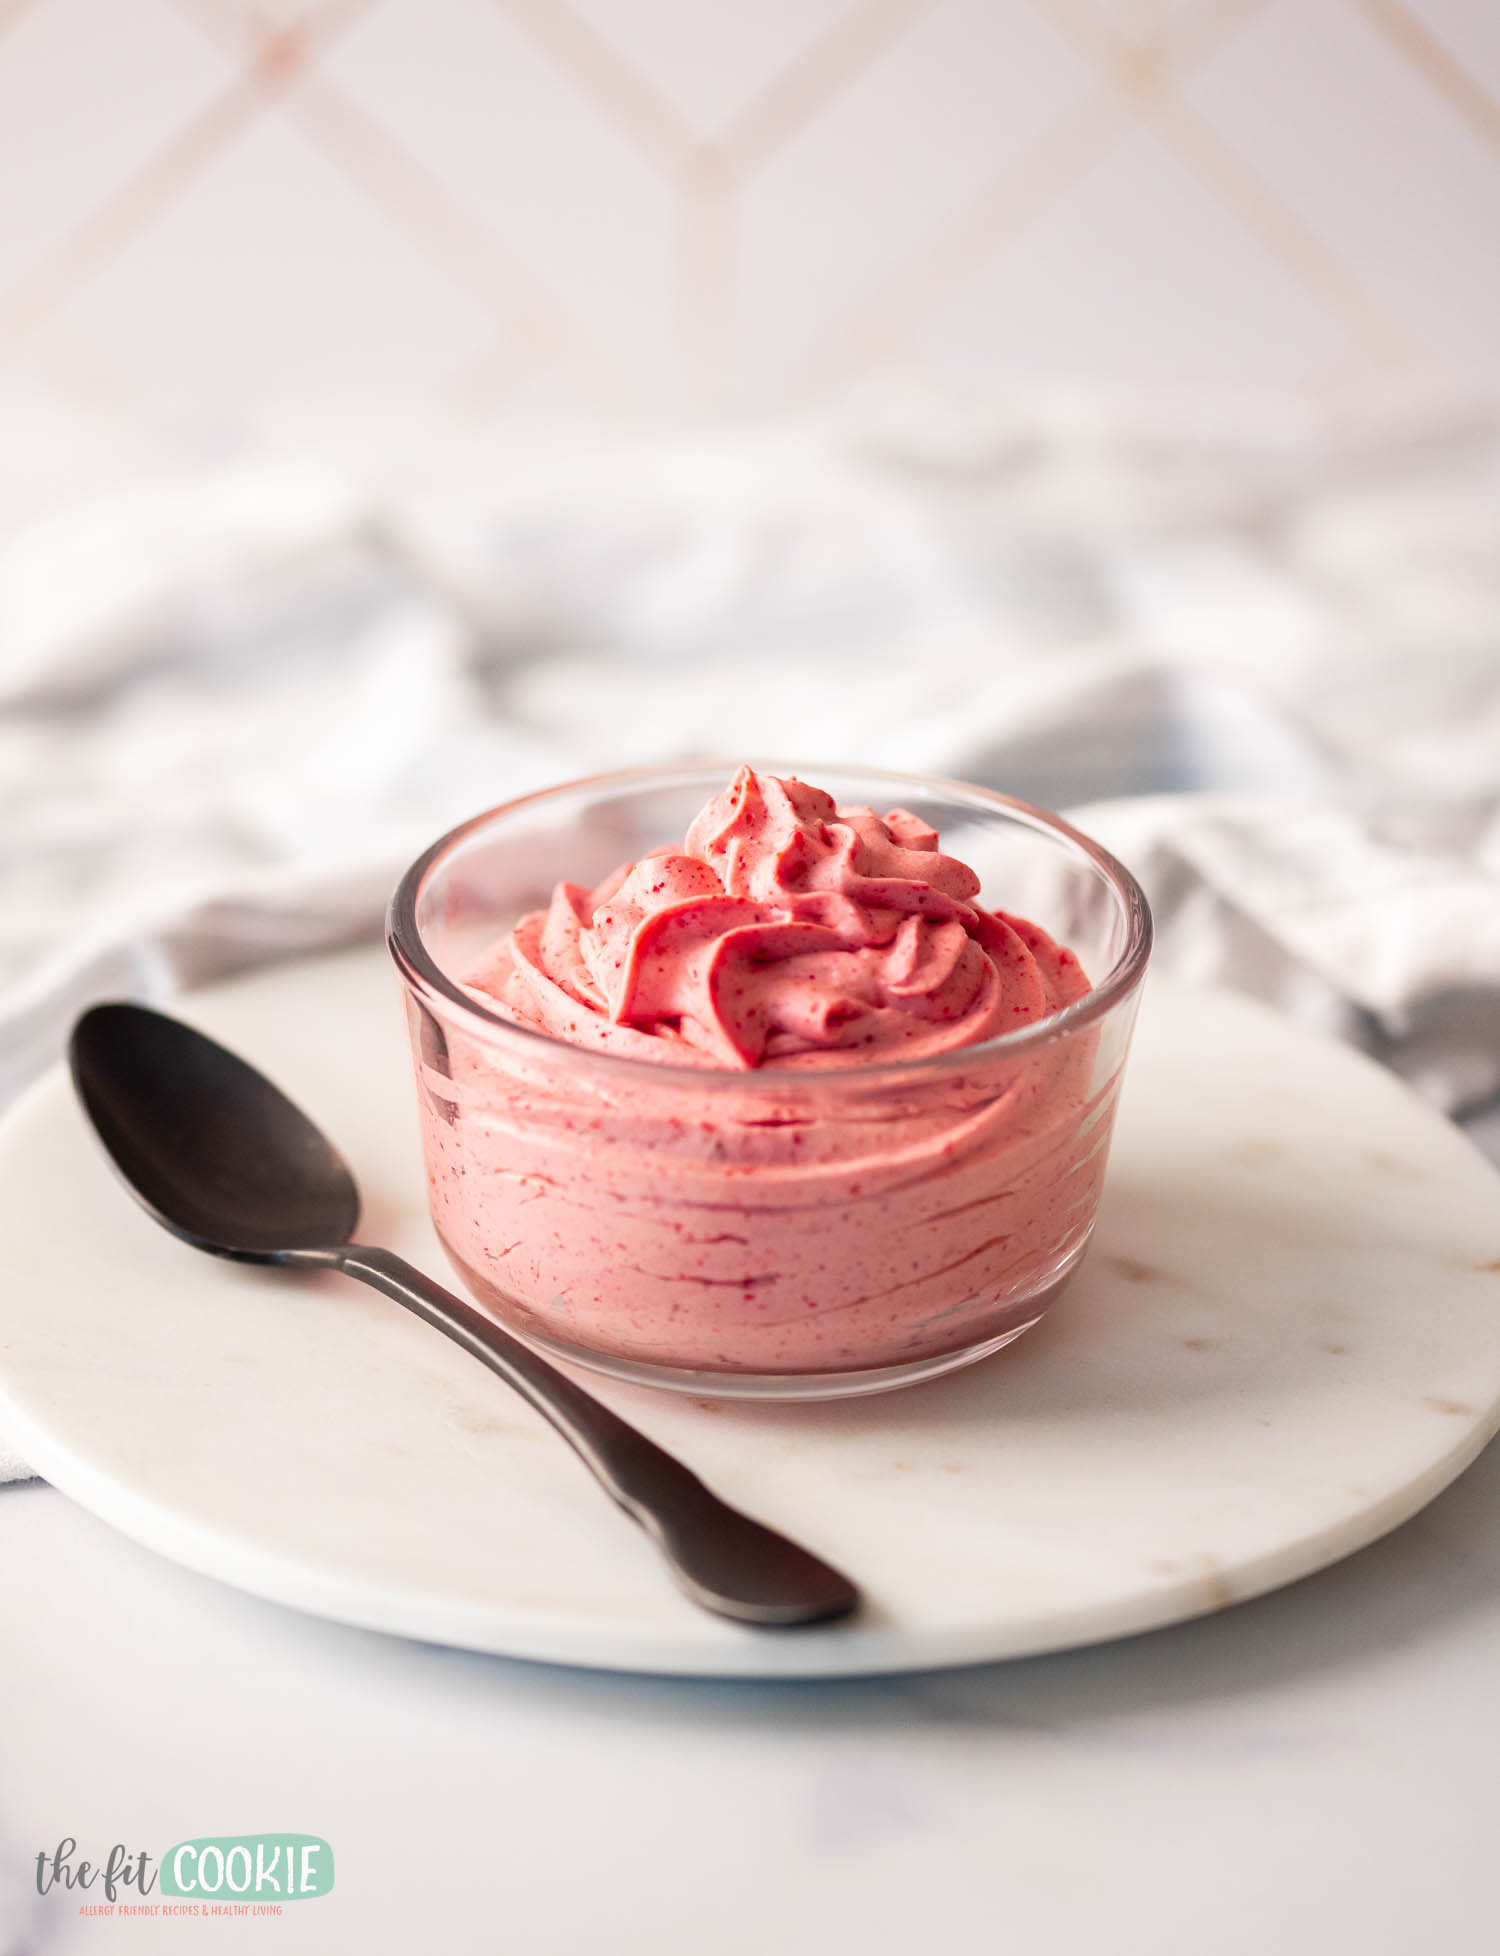 A bowl of pink strawberry mousse with a spoon on a white marble surface.